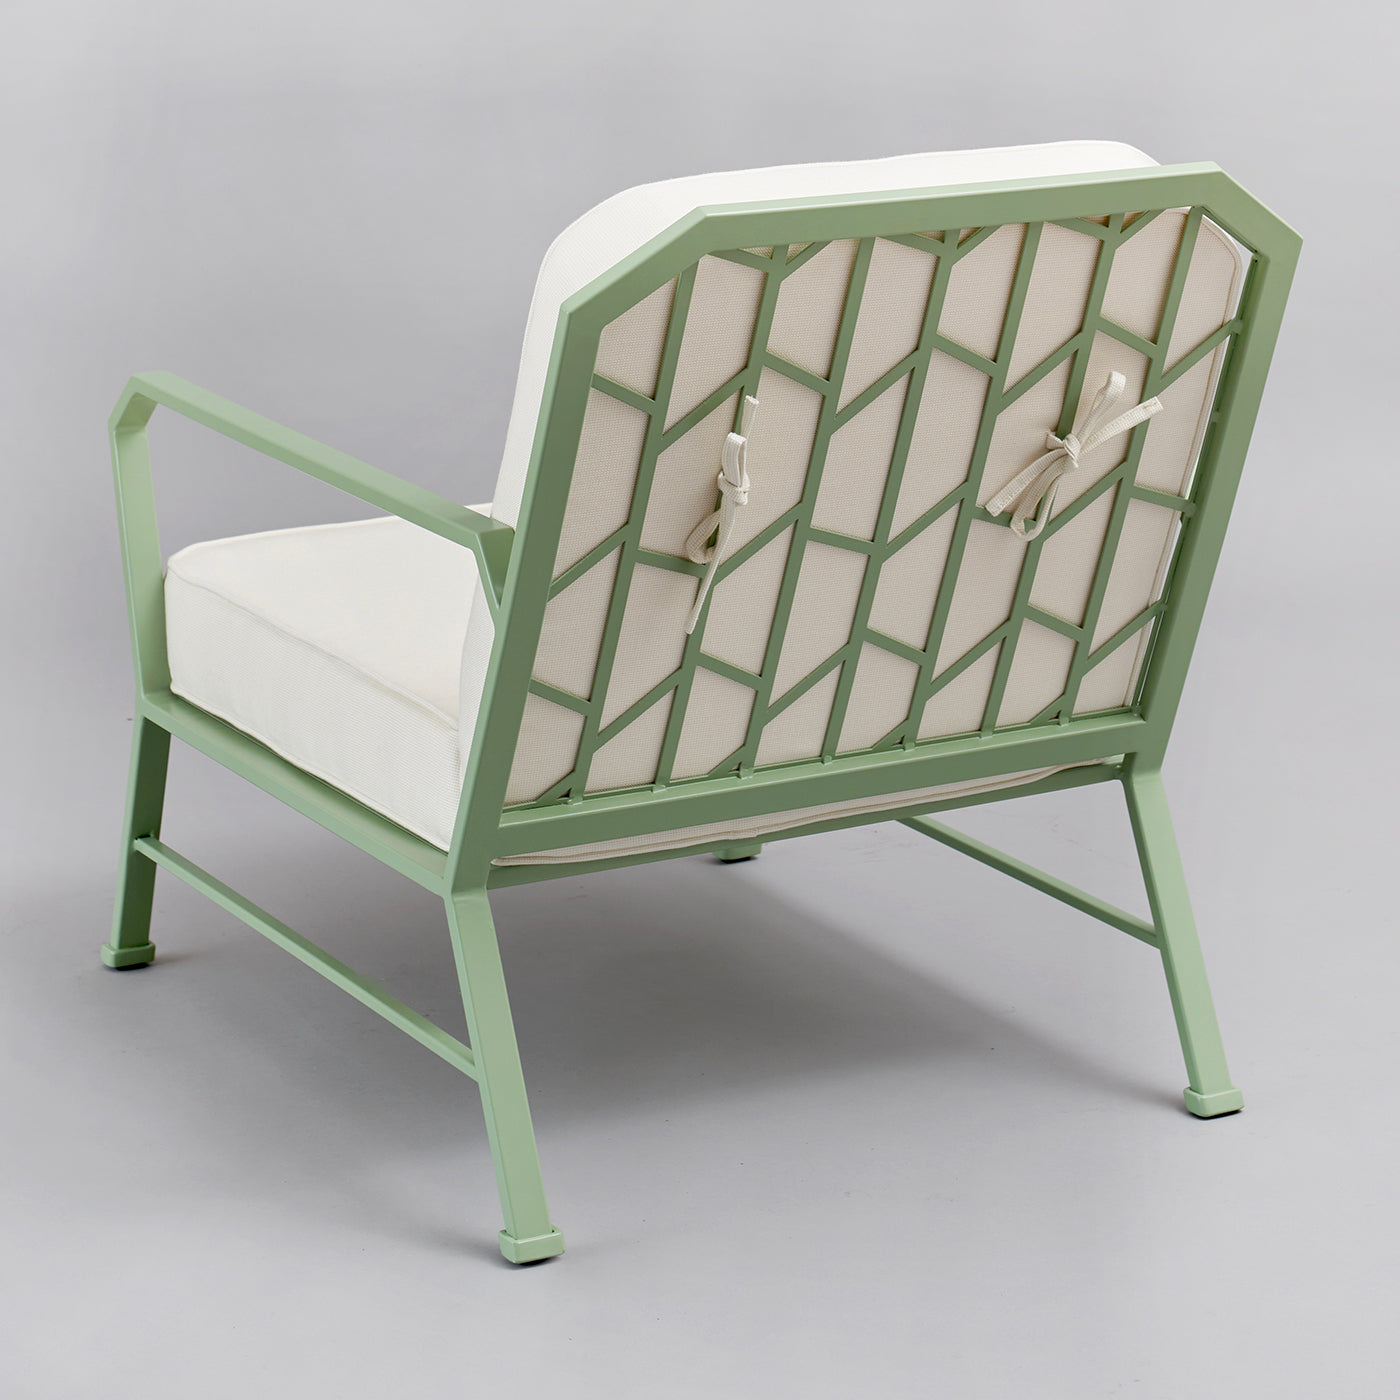 Forest Green and White Armchair by Officina Ciani in Stainless Steel - Alternative view 2